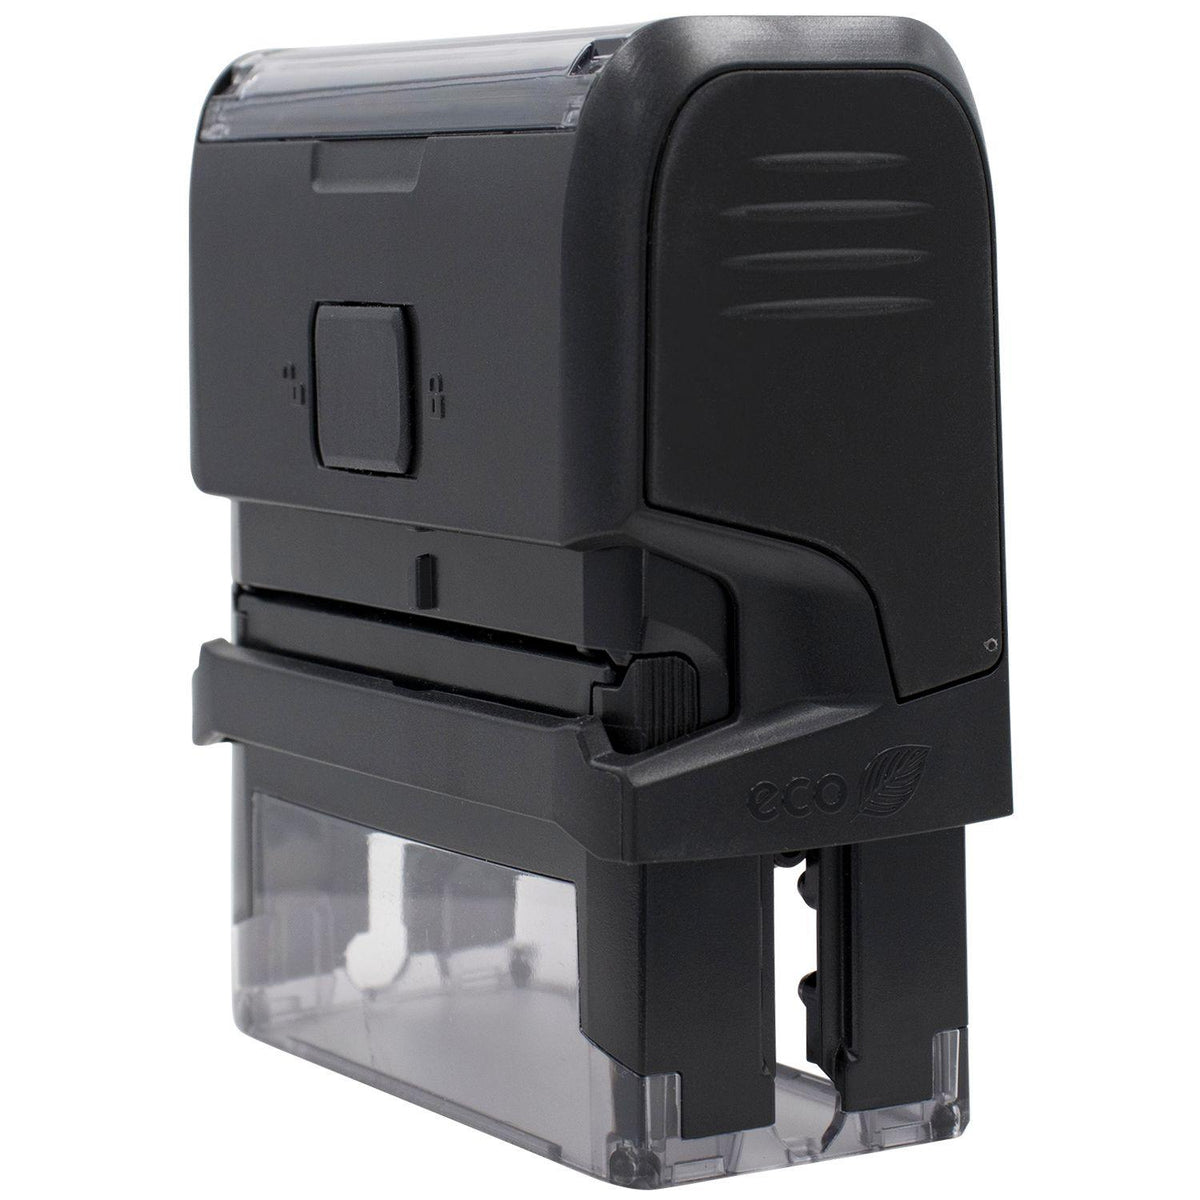 Side View of Large Self-Inking Bold Deceased Stamp at an Angle